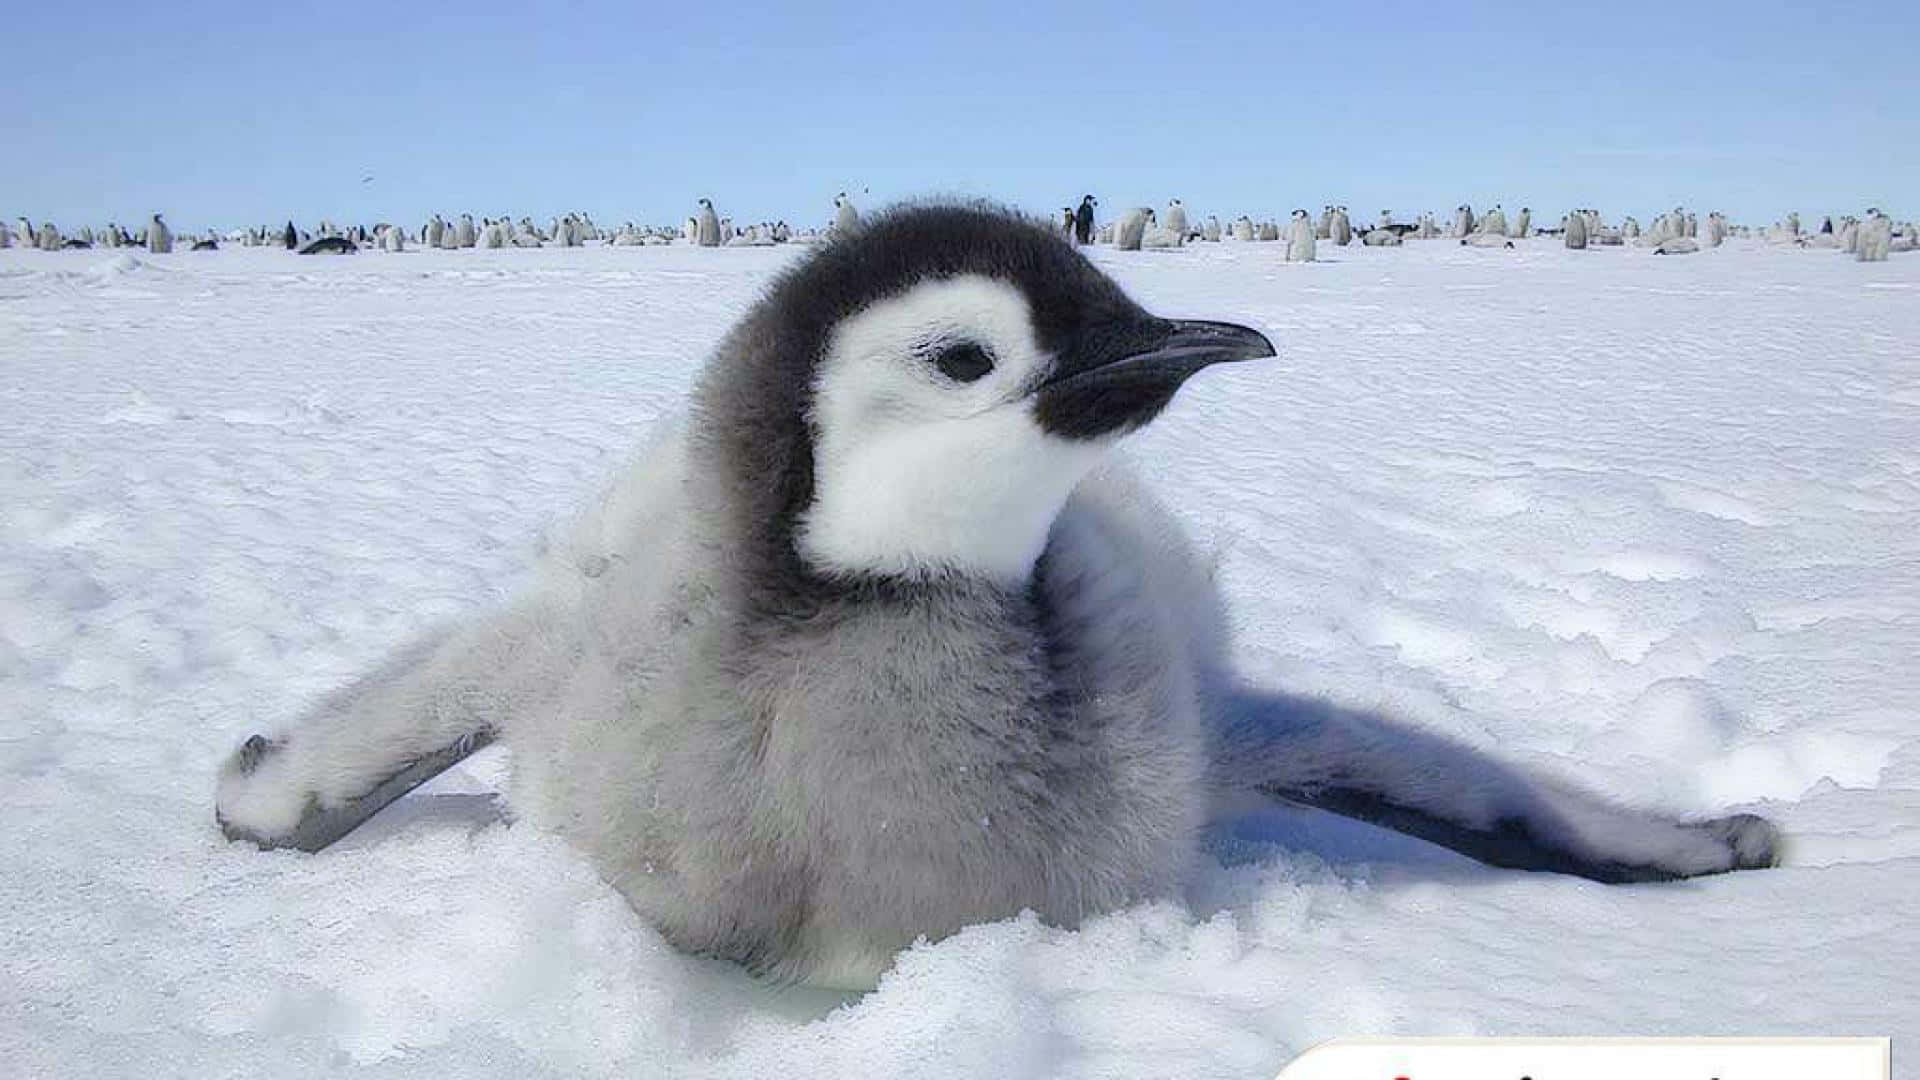 Adorable baby penguin sitting in a quiet beach